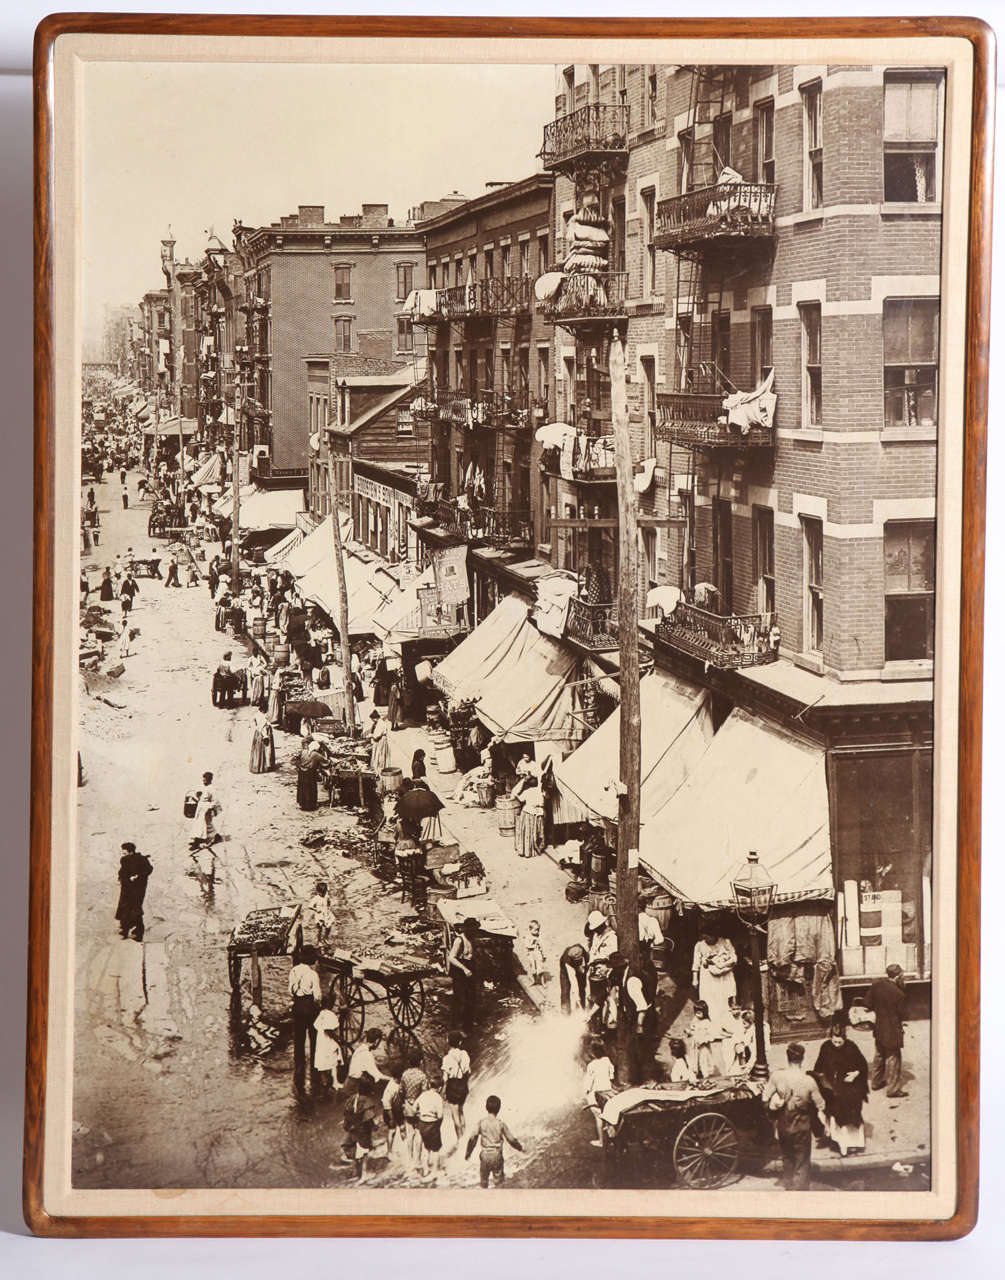 The hustle and bustle of New York captured in a 1901 photograph of the Lower East Side in Manhattan Taken by unknown photographer, the image depicts the unrelenting, yet frivolous vitality of the city that has not yet waned over more than a century.